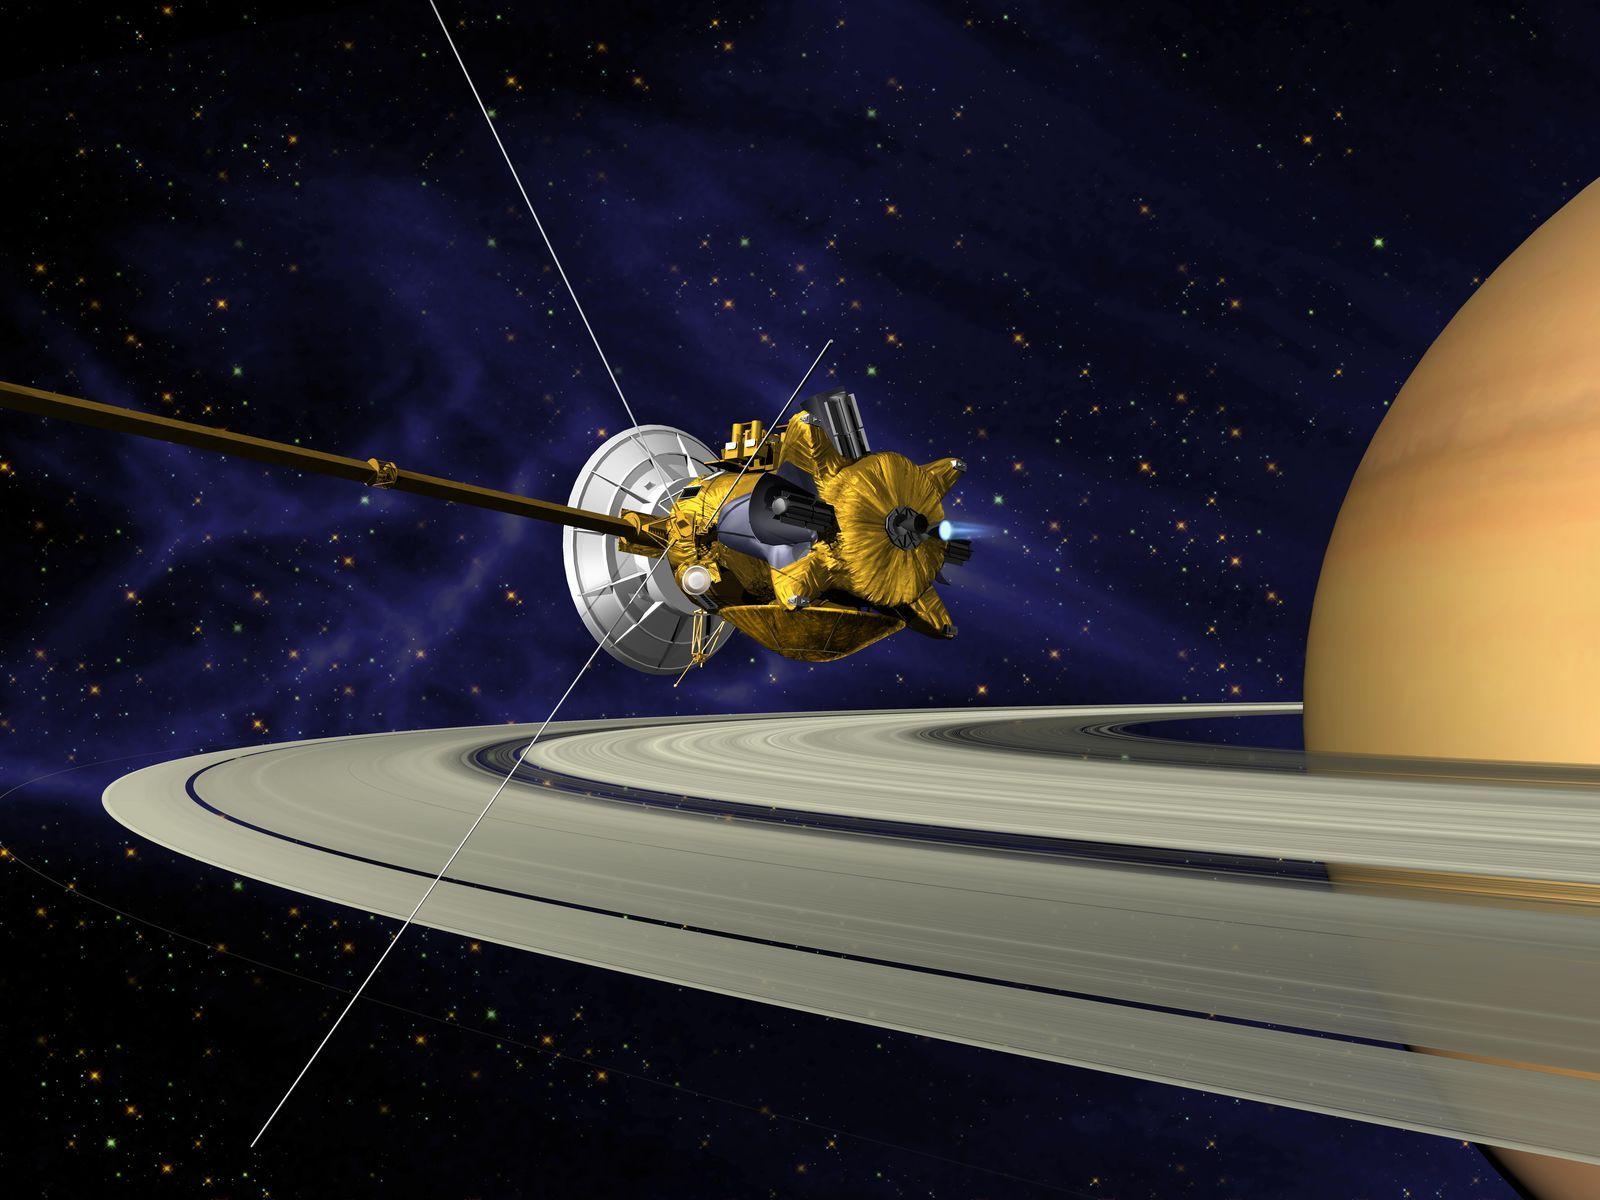 Space Image. Artists's Conception of Cassini Saturn Orbit Insertion